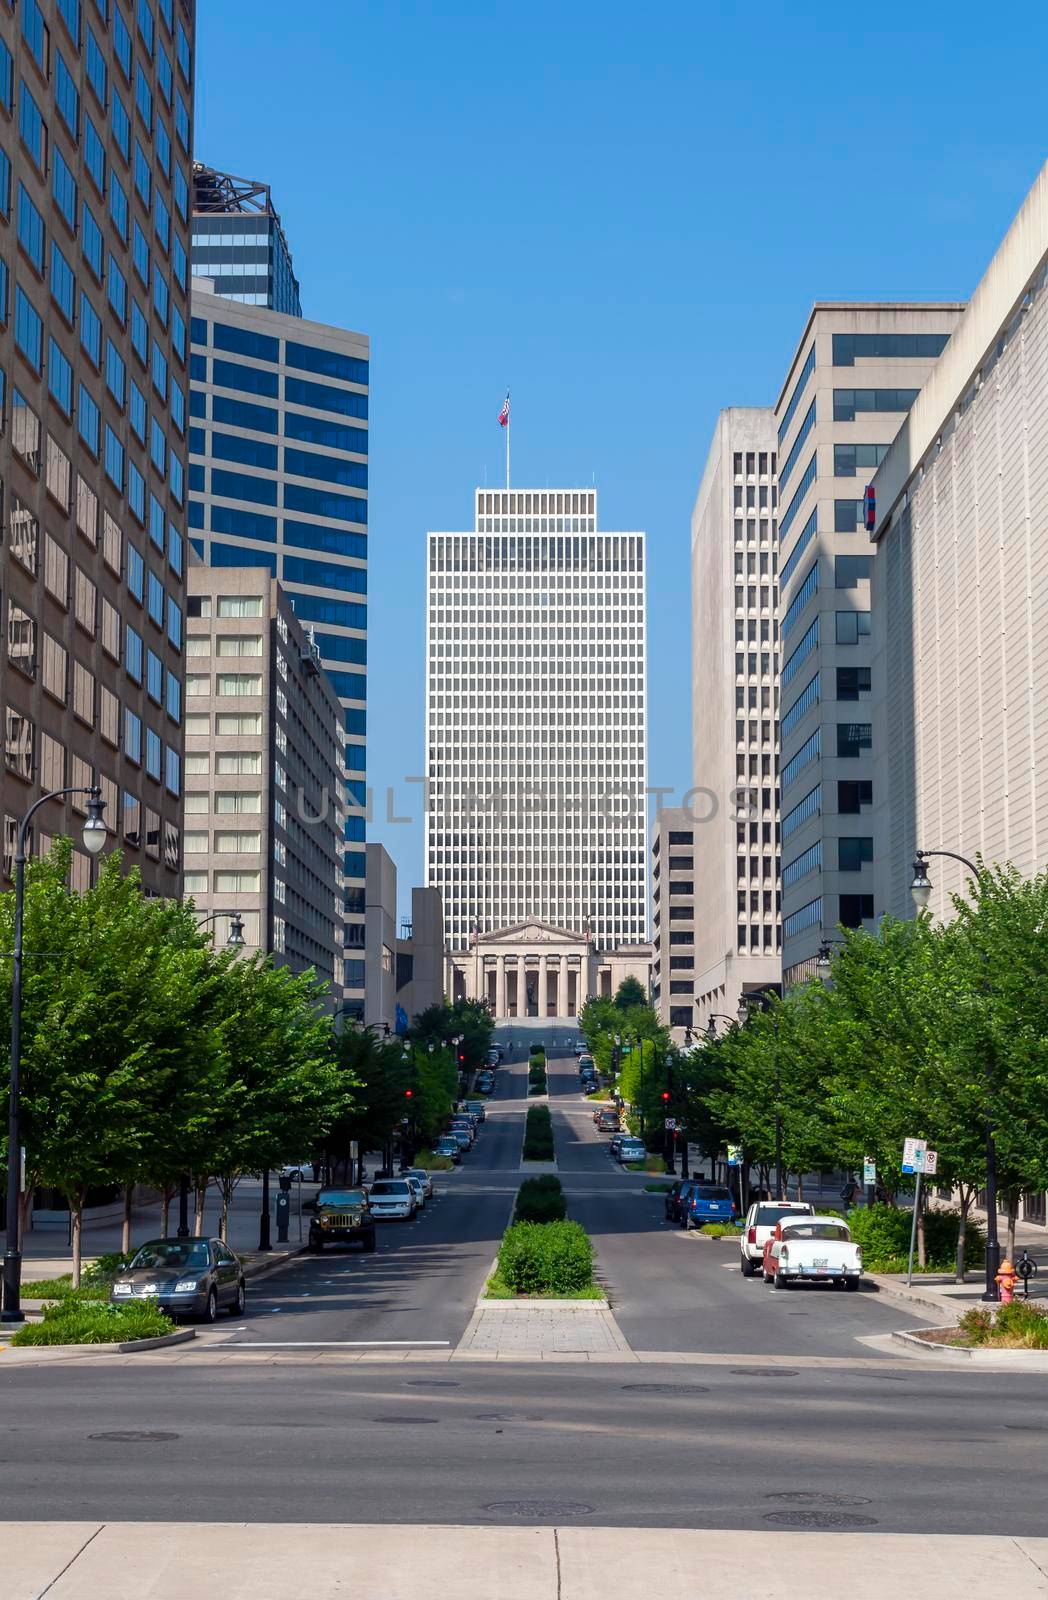 Buildings along Deaderick St in downtown Nashville, Tennessee, United States of America.